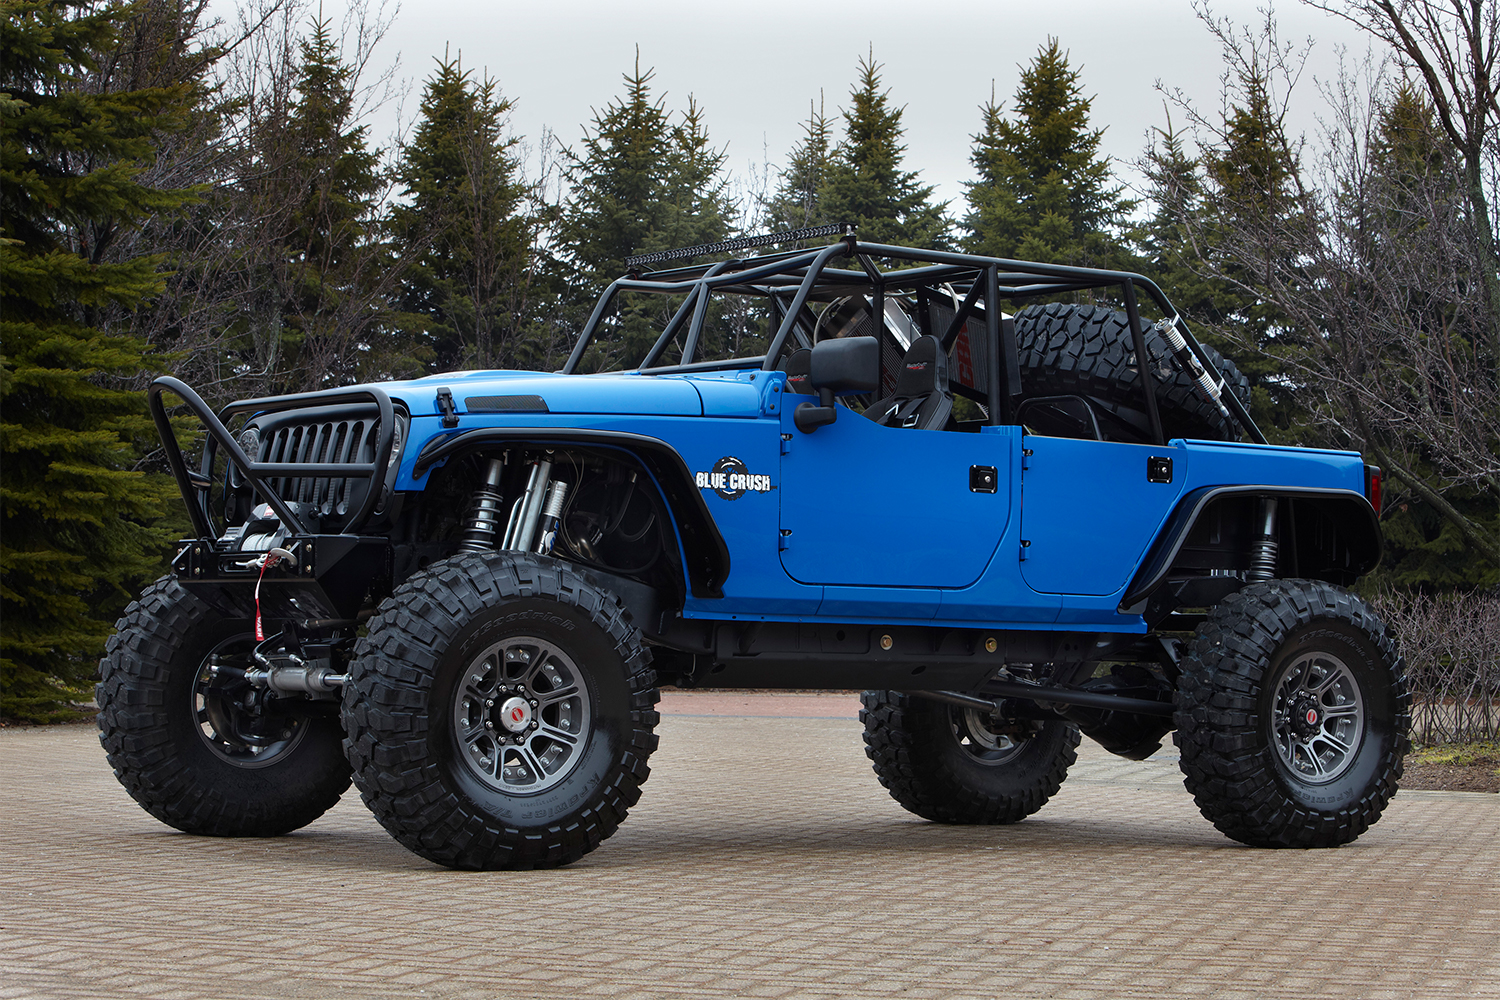 The 6 Best Jeep Wrangler Concepts From the Easter Safari - InsideHook